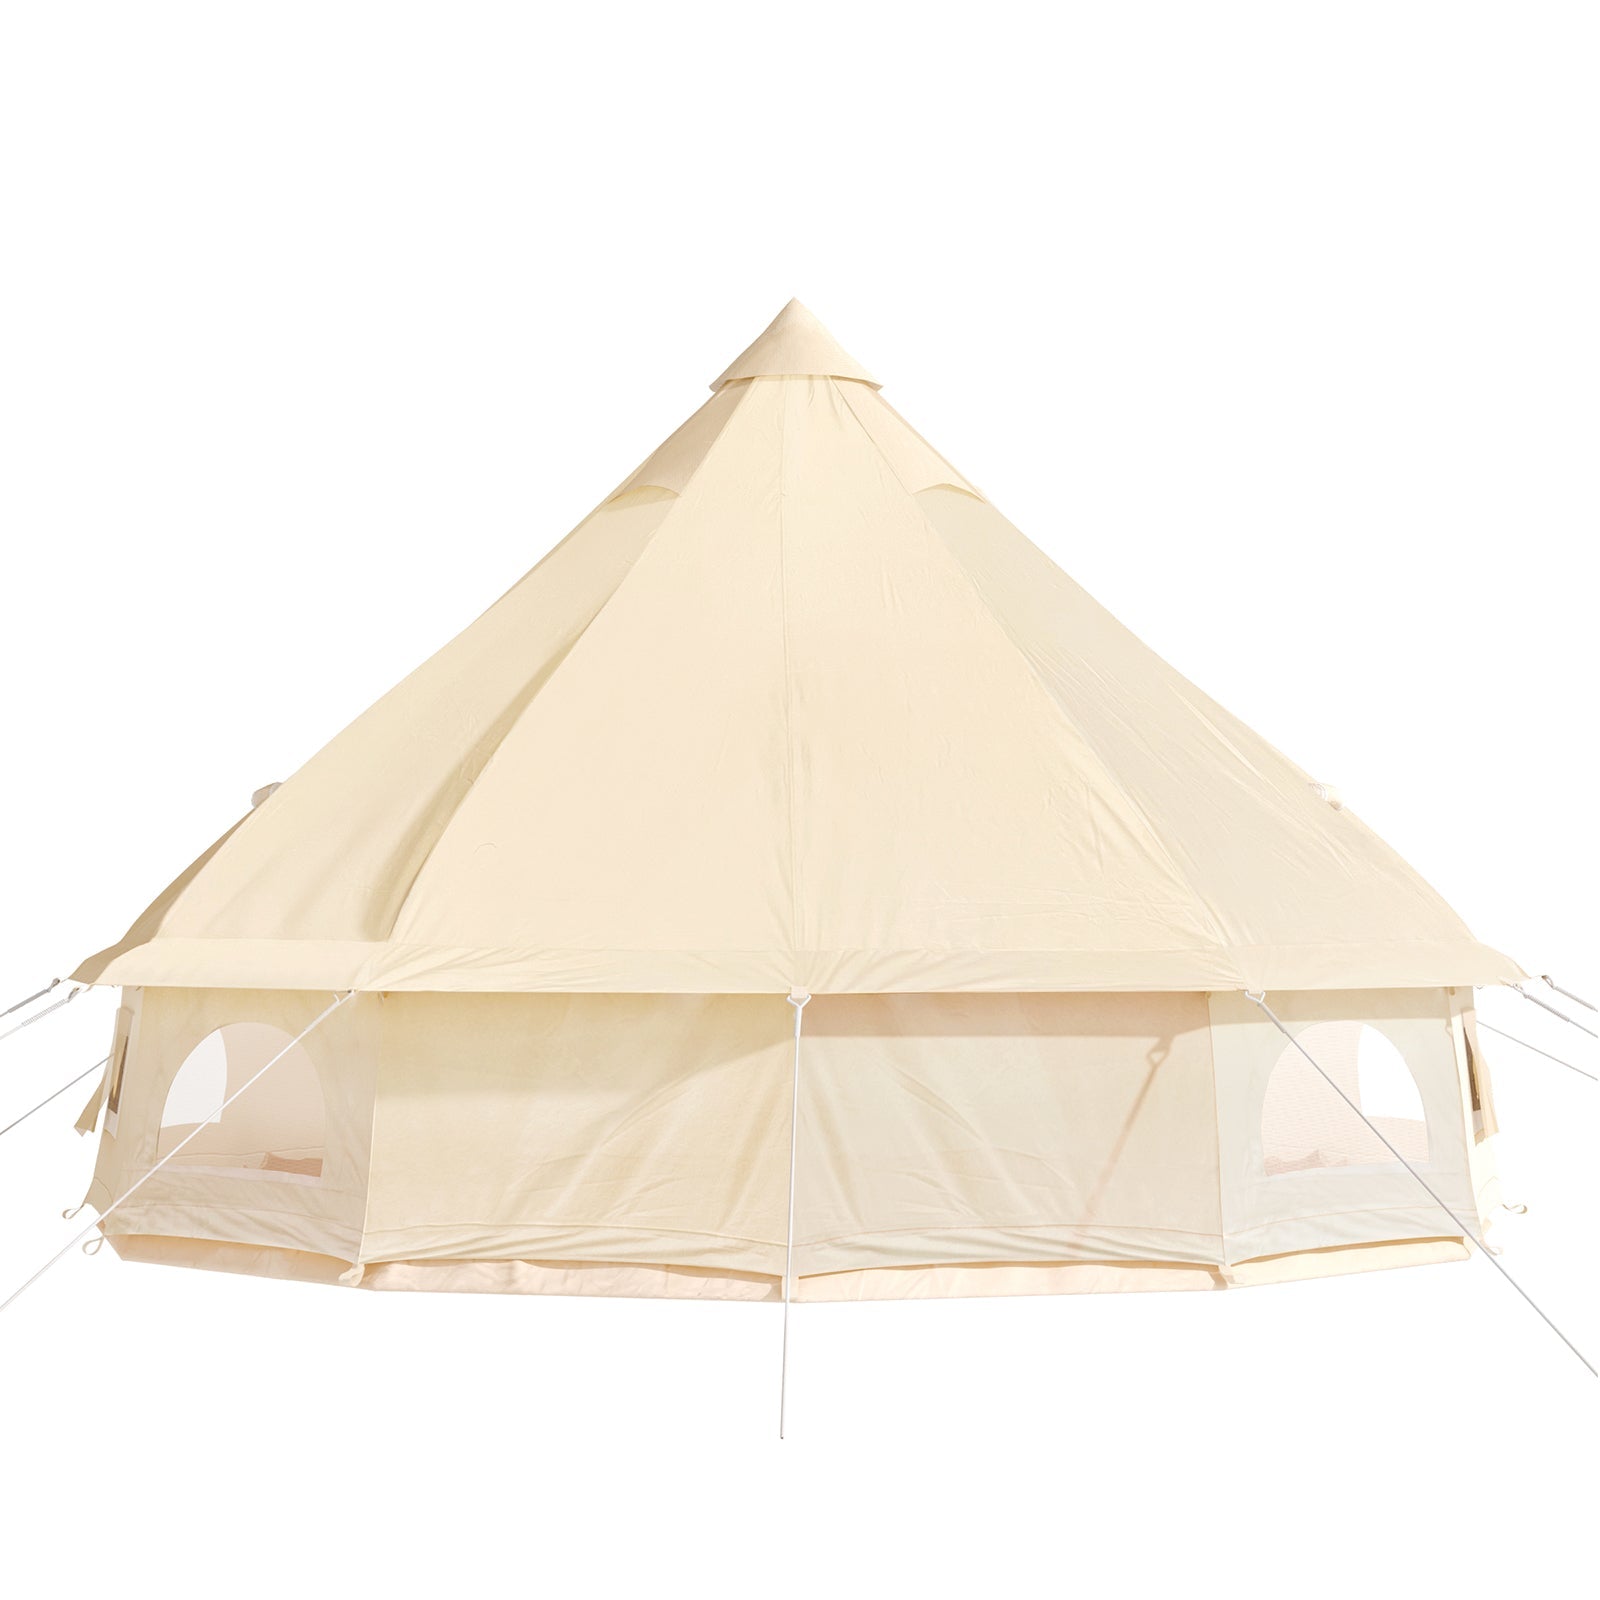 VEVORbrand Canvas Bell Tent 19.7ft Cotton Canvas Tent with Wall Stove Jacket Glamping Tent Waterproof Bell Tent for Family Camping Outdoor Hunting in 4 Seasons